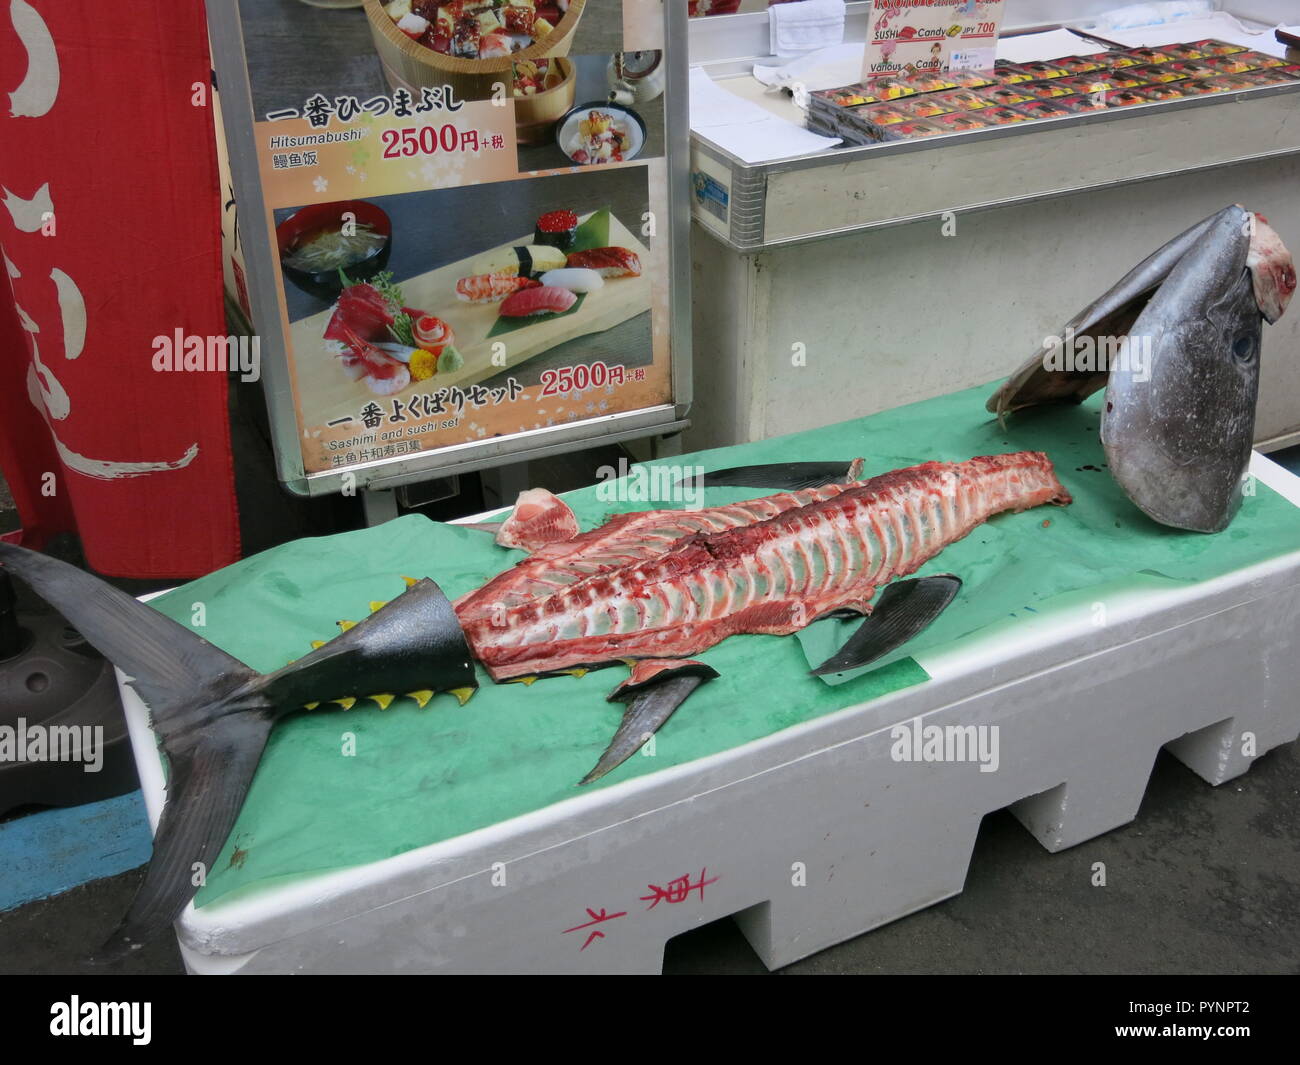 Street scene of a Japanese food market in central Tokyo; skeleton remains of a large fish Stock Photo